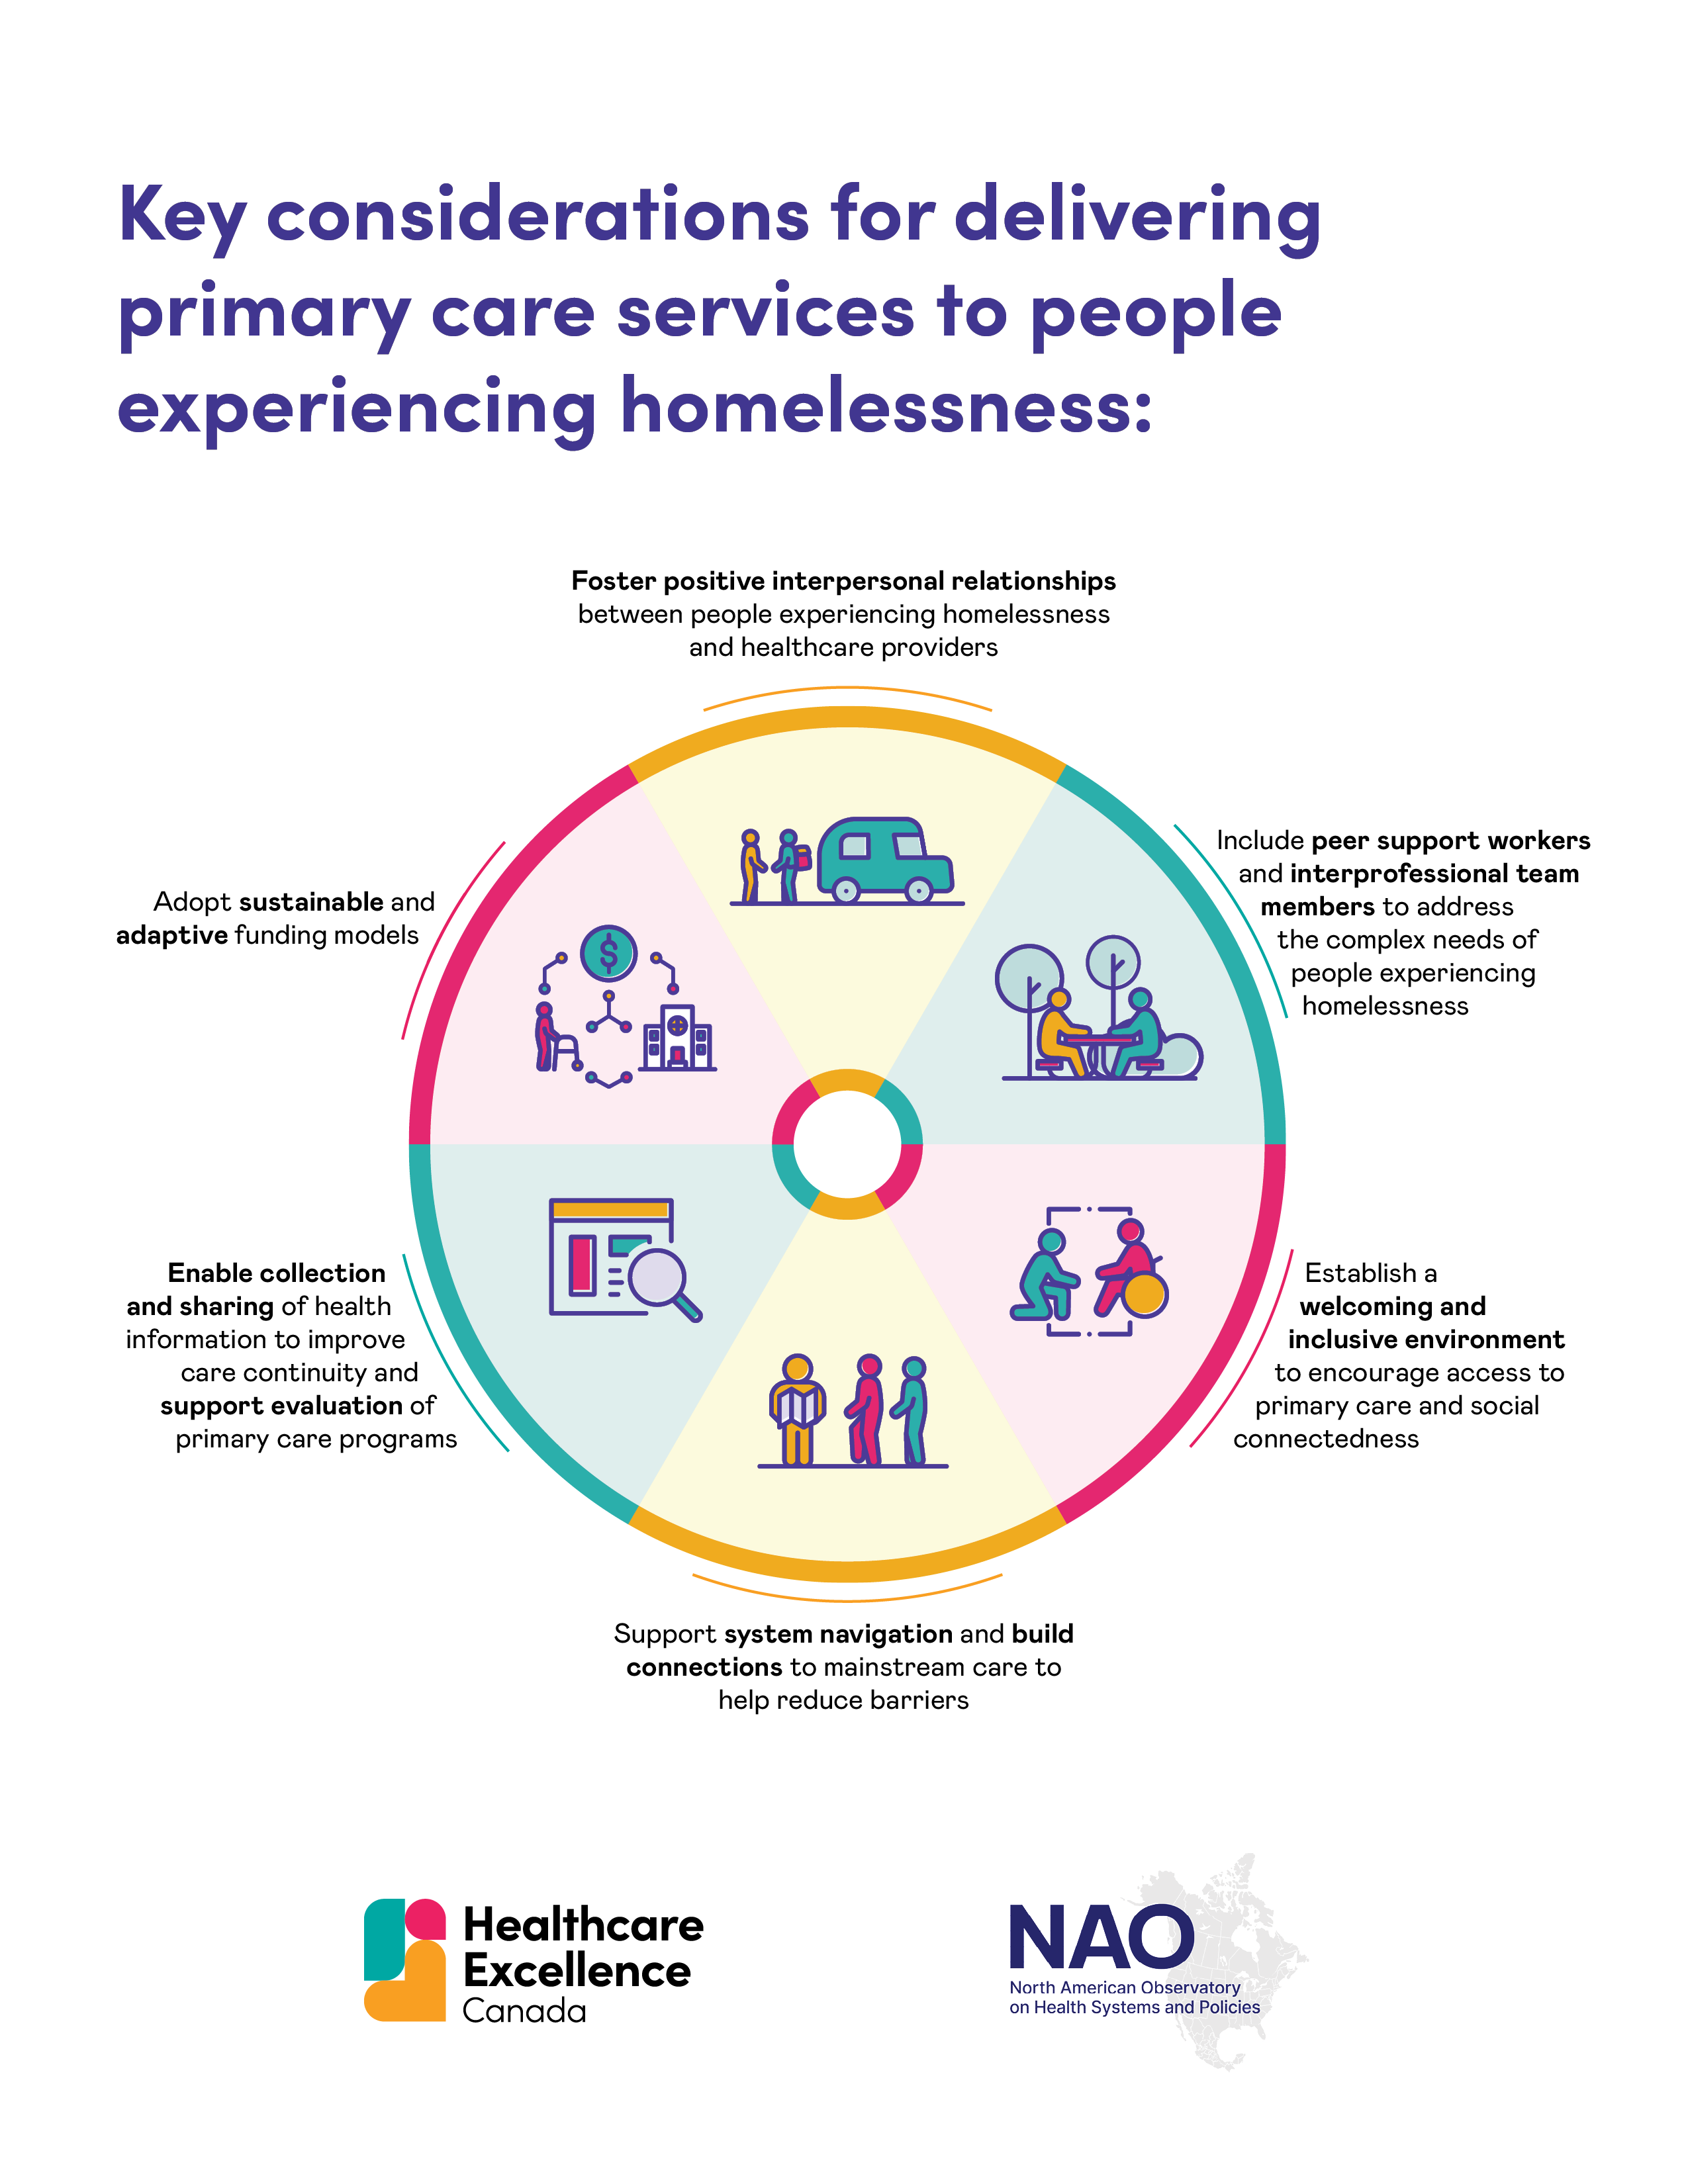 Key considerations for delivering primary care services to people experiencing homelessness: Foster positive interpersonal relationships between people experiencing homelessness and healthcare providers, include peer support workers and interprofessional team members to address the complex needs of people experiencing homelessness, establish a welcoming and inclusive environment to encourage access to primary care and social connectedness, support system navigation and build connections to mainstream care to help reduce barriers, enable collection and sharing of health information to improve care continuity and support evaluation of primary care programs, and adopt sustainable and adaptive funding models.